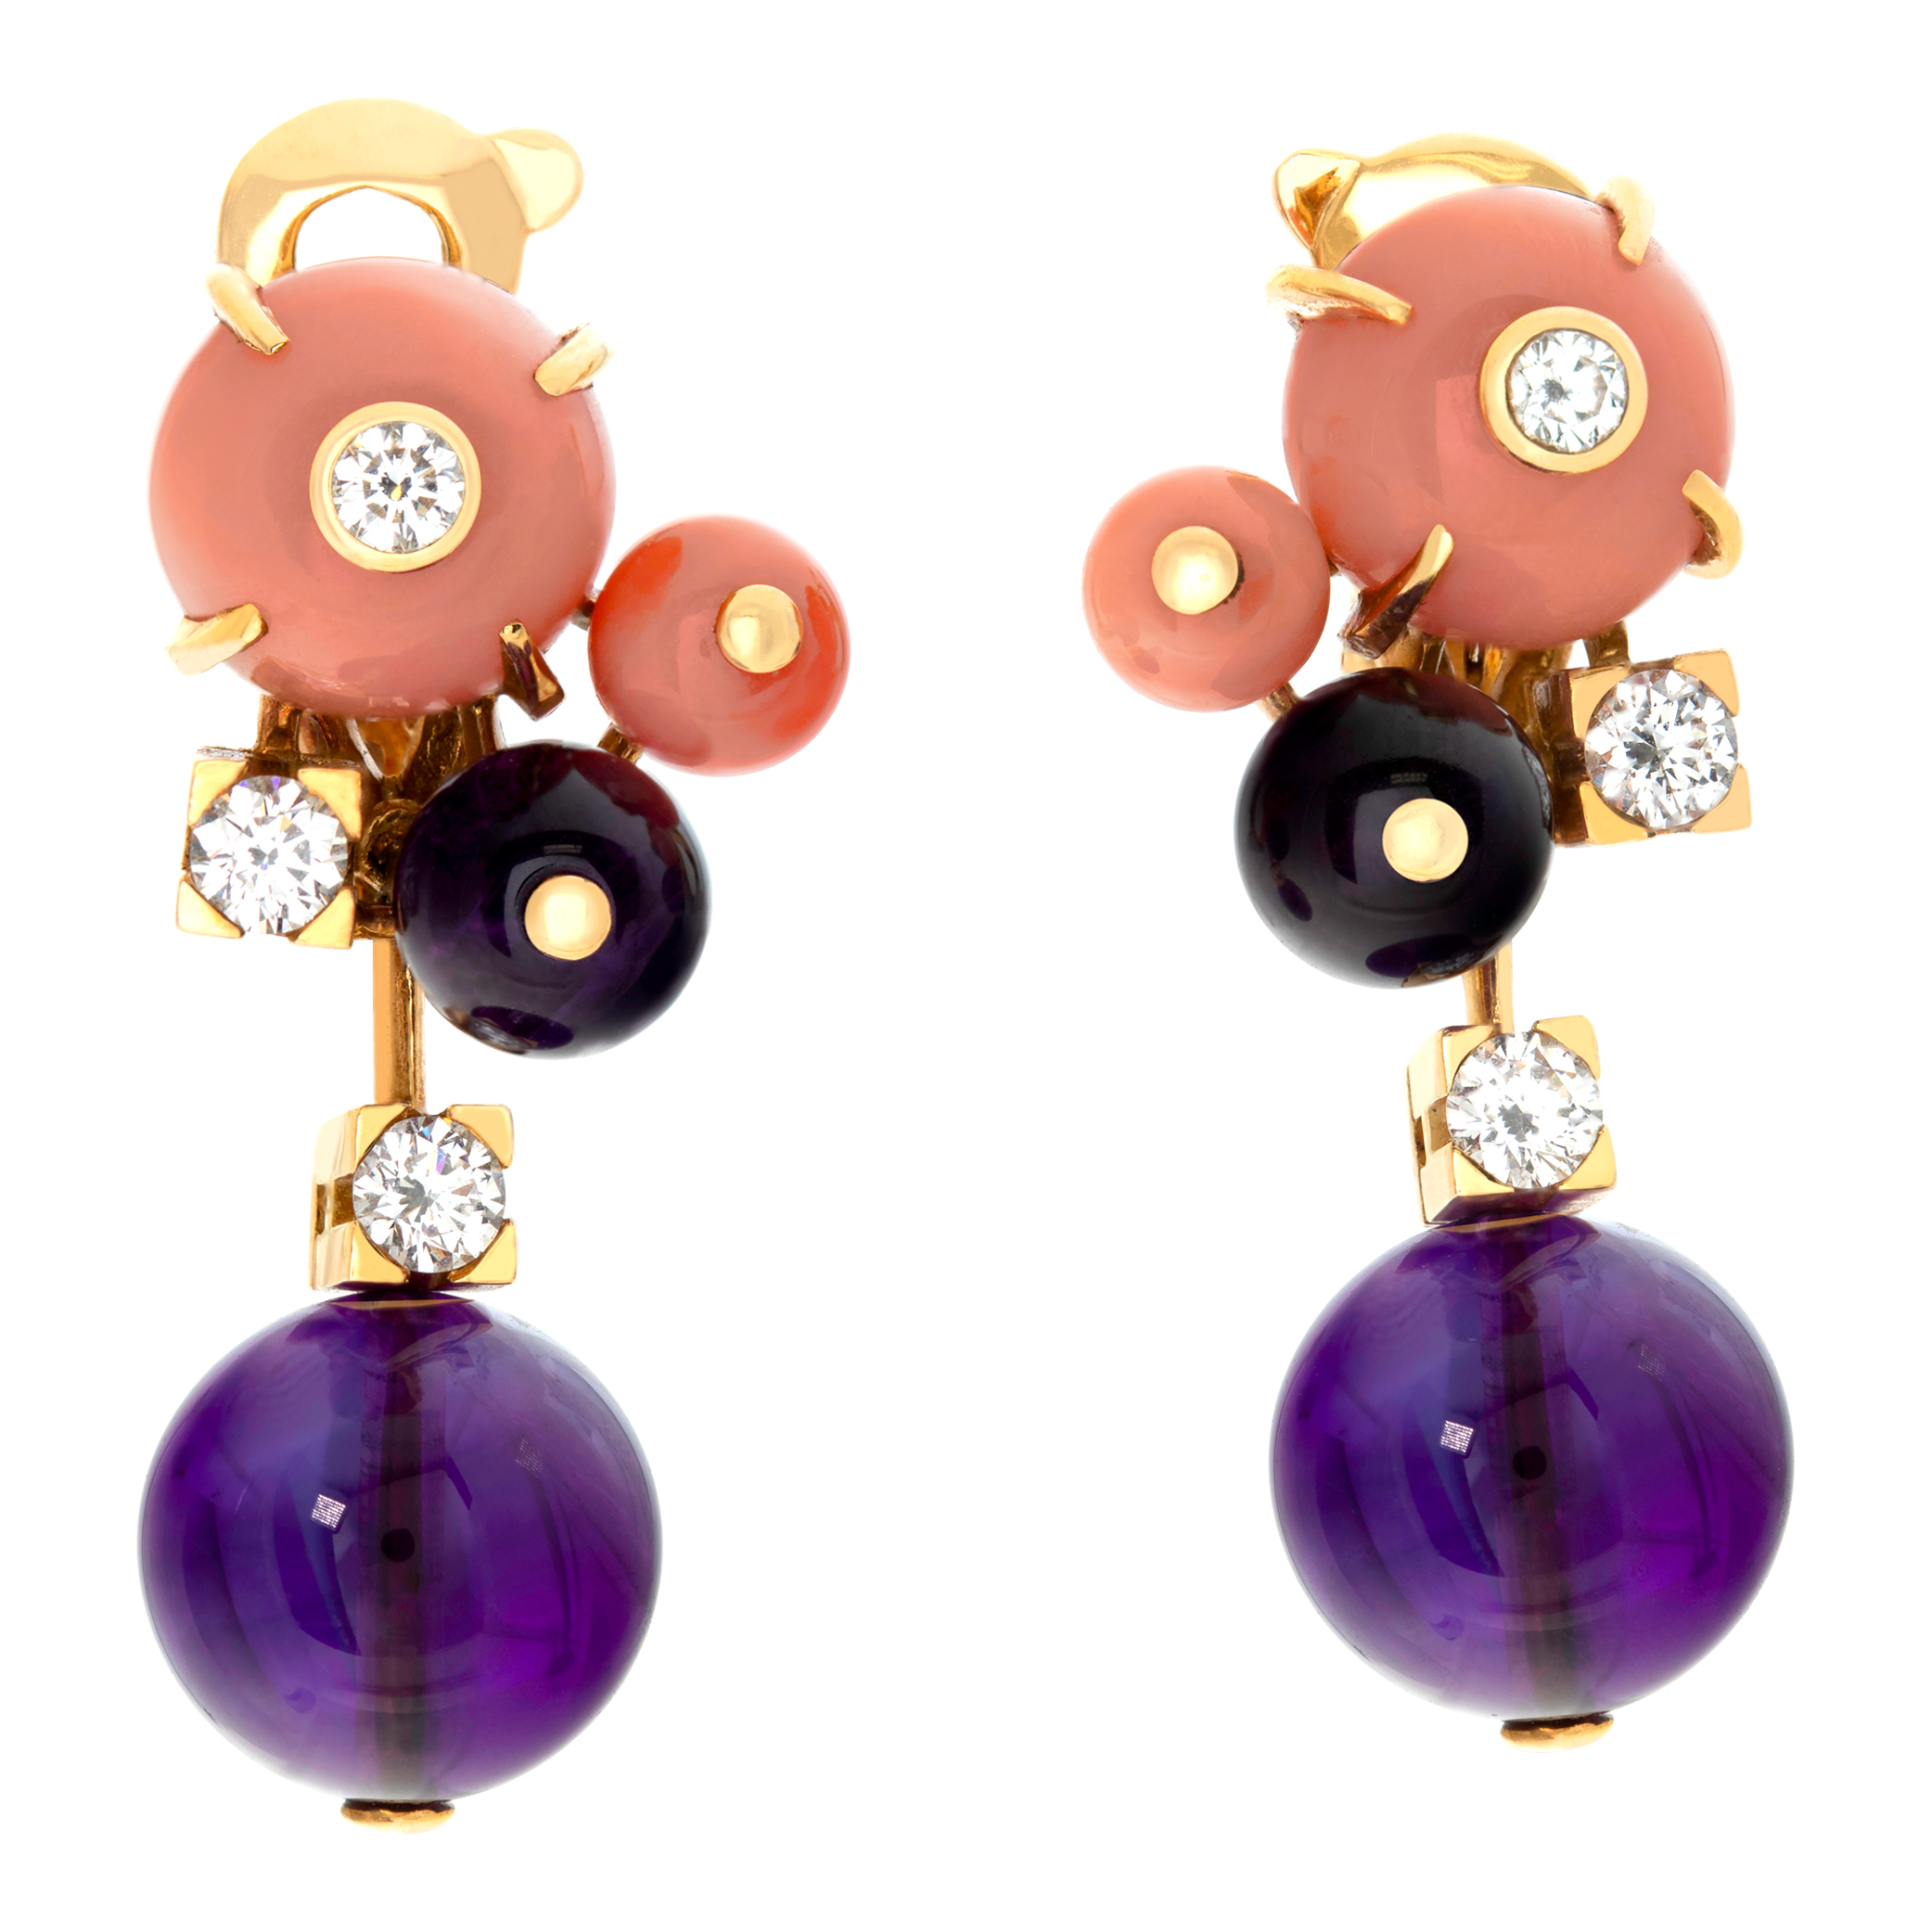 Cartier "Les Delices de Goa" earrings in 18k yellow gold with amethysts, coral, and diamonds